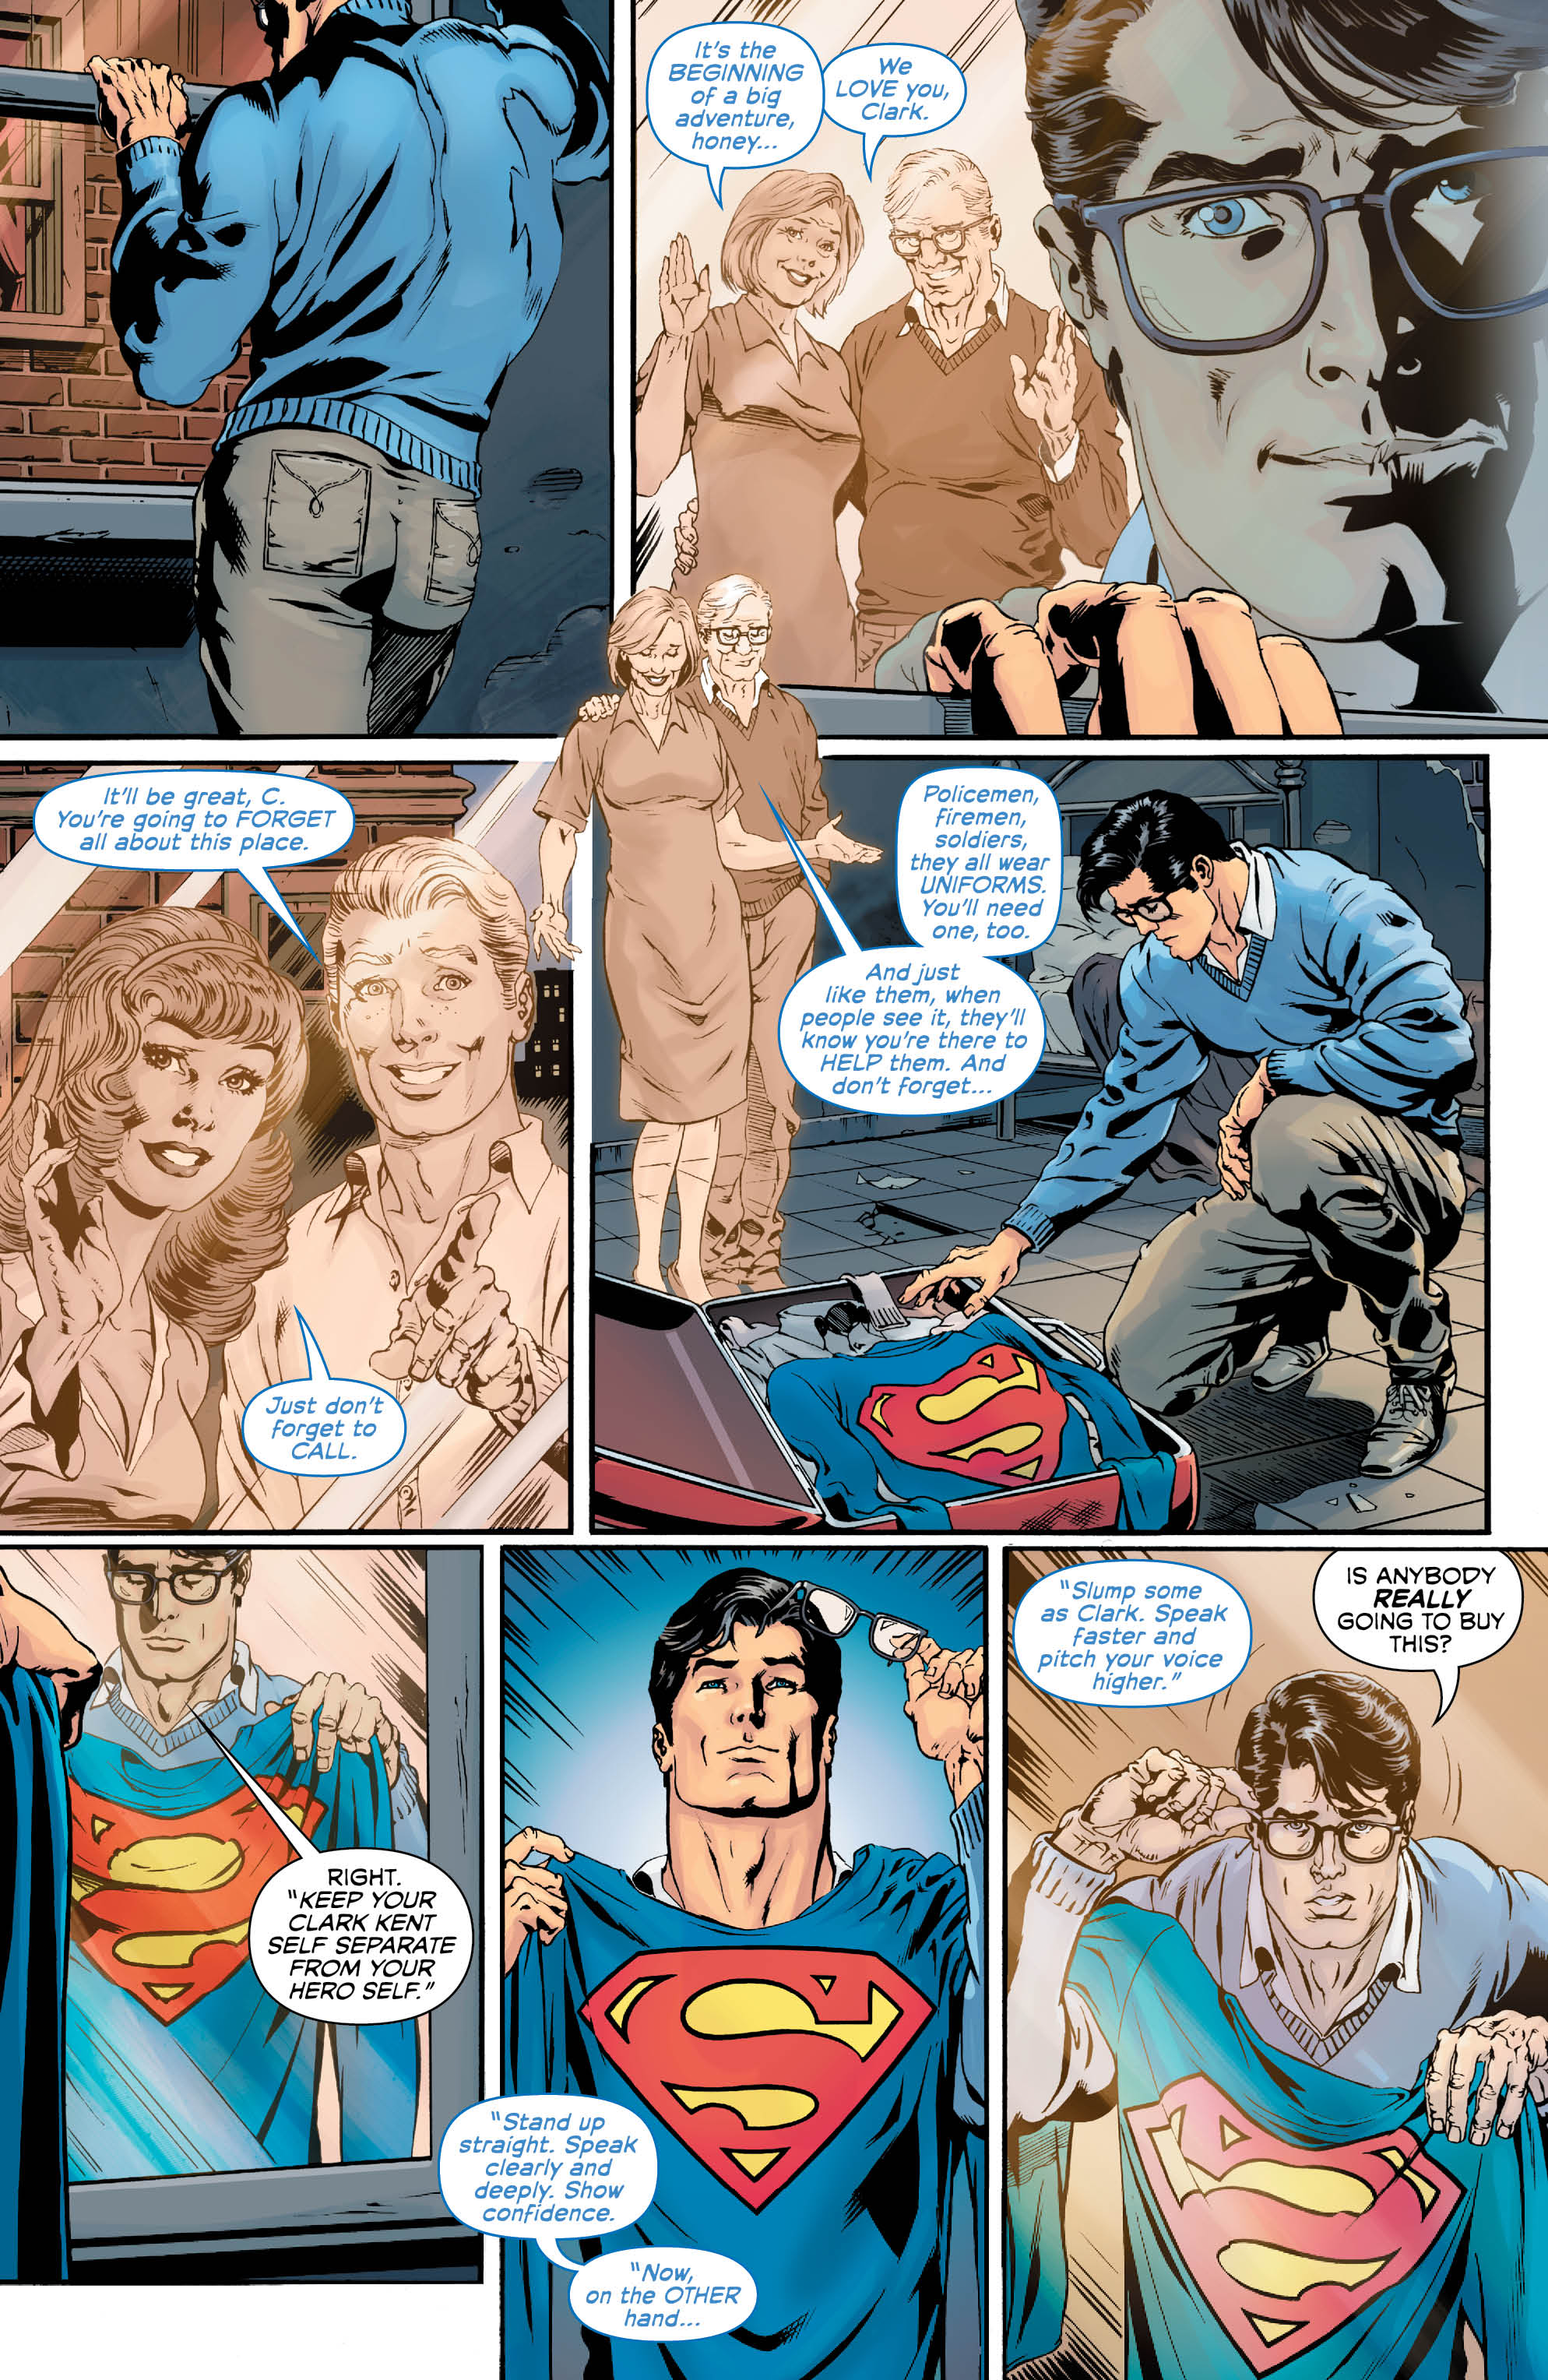 Review: Mad Super Spectacular: Superman, Man of Steel #1